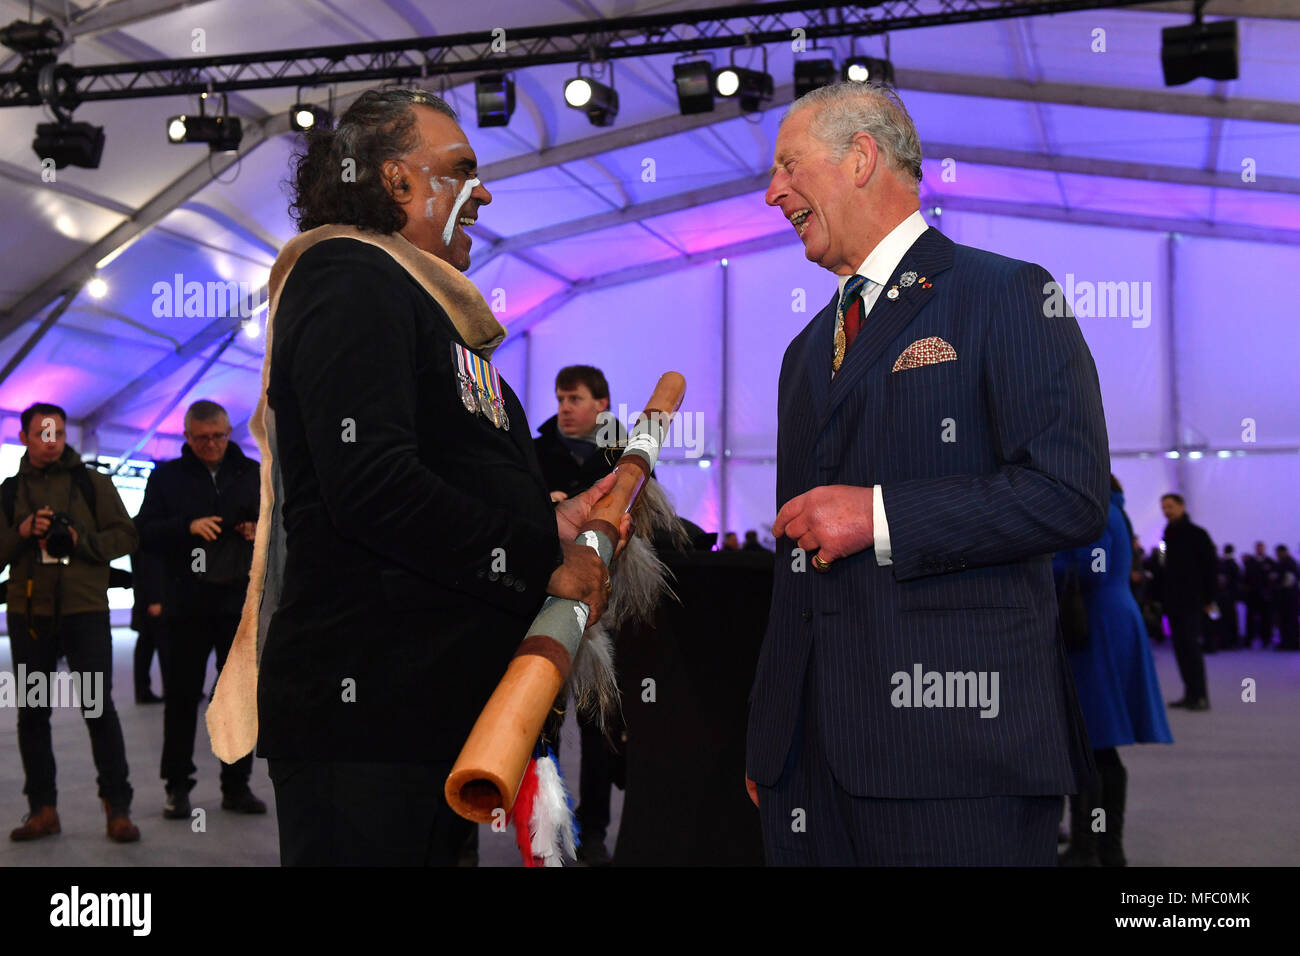 The Prince of Wales meets indigenous didgeridoo player David Dahwurr Hudson after an early morning memorial at the Villers-Bretonneux Memorial in France, to mark the 100th anniversary of the Battle of Villers-Bretonneux. Stock Photo